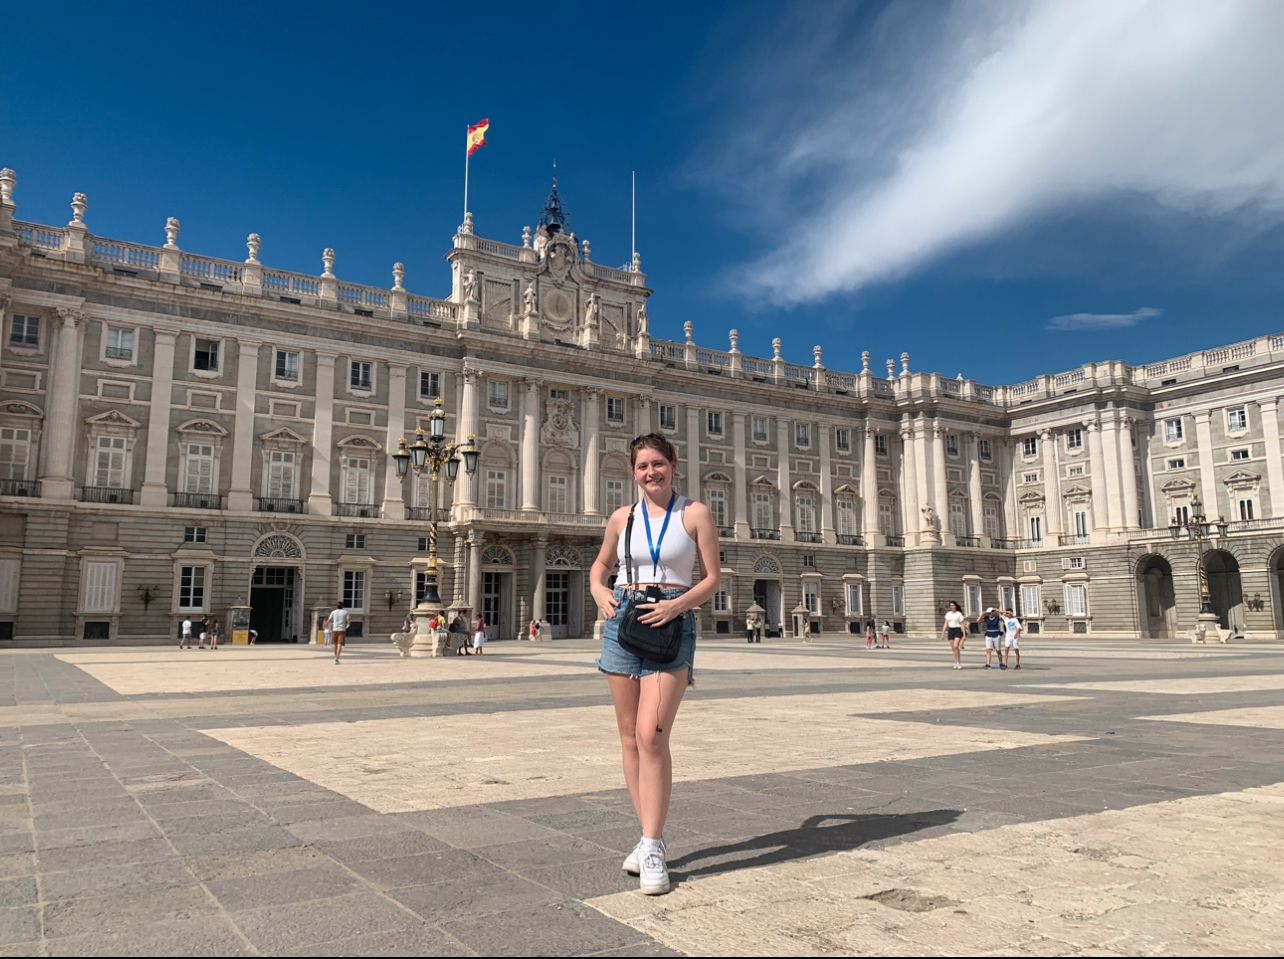 Elizabeth standing in front of the Royal Palace in Madrid